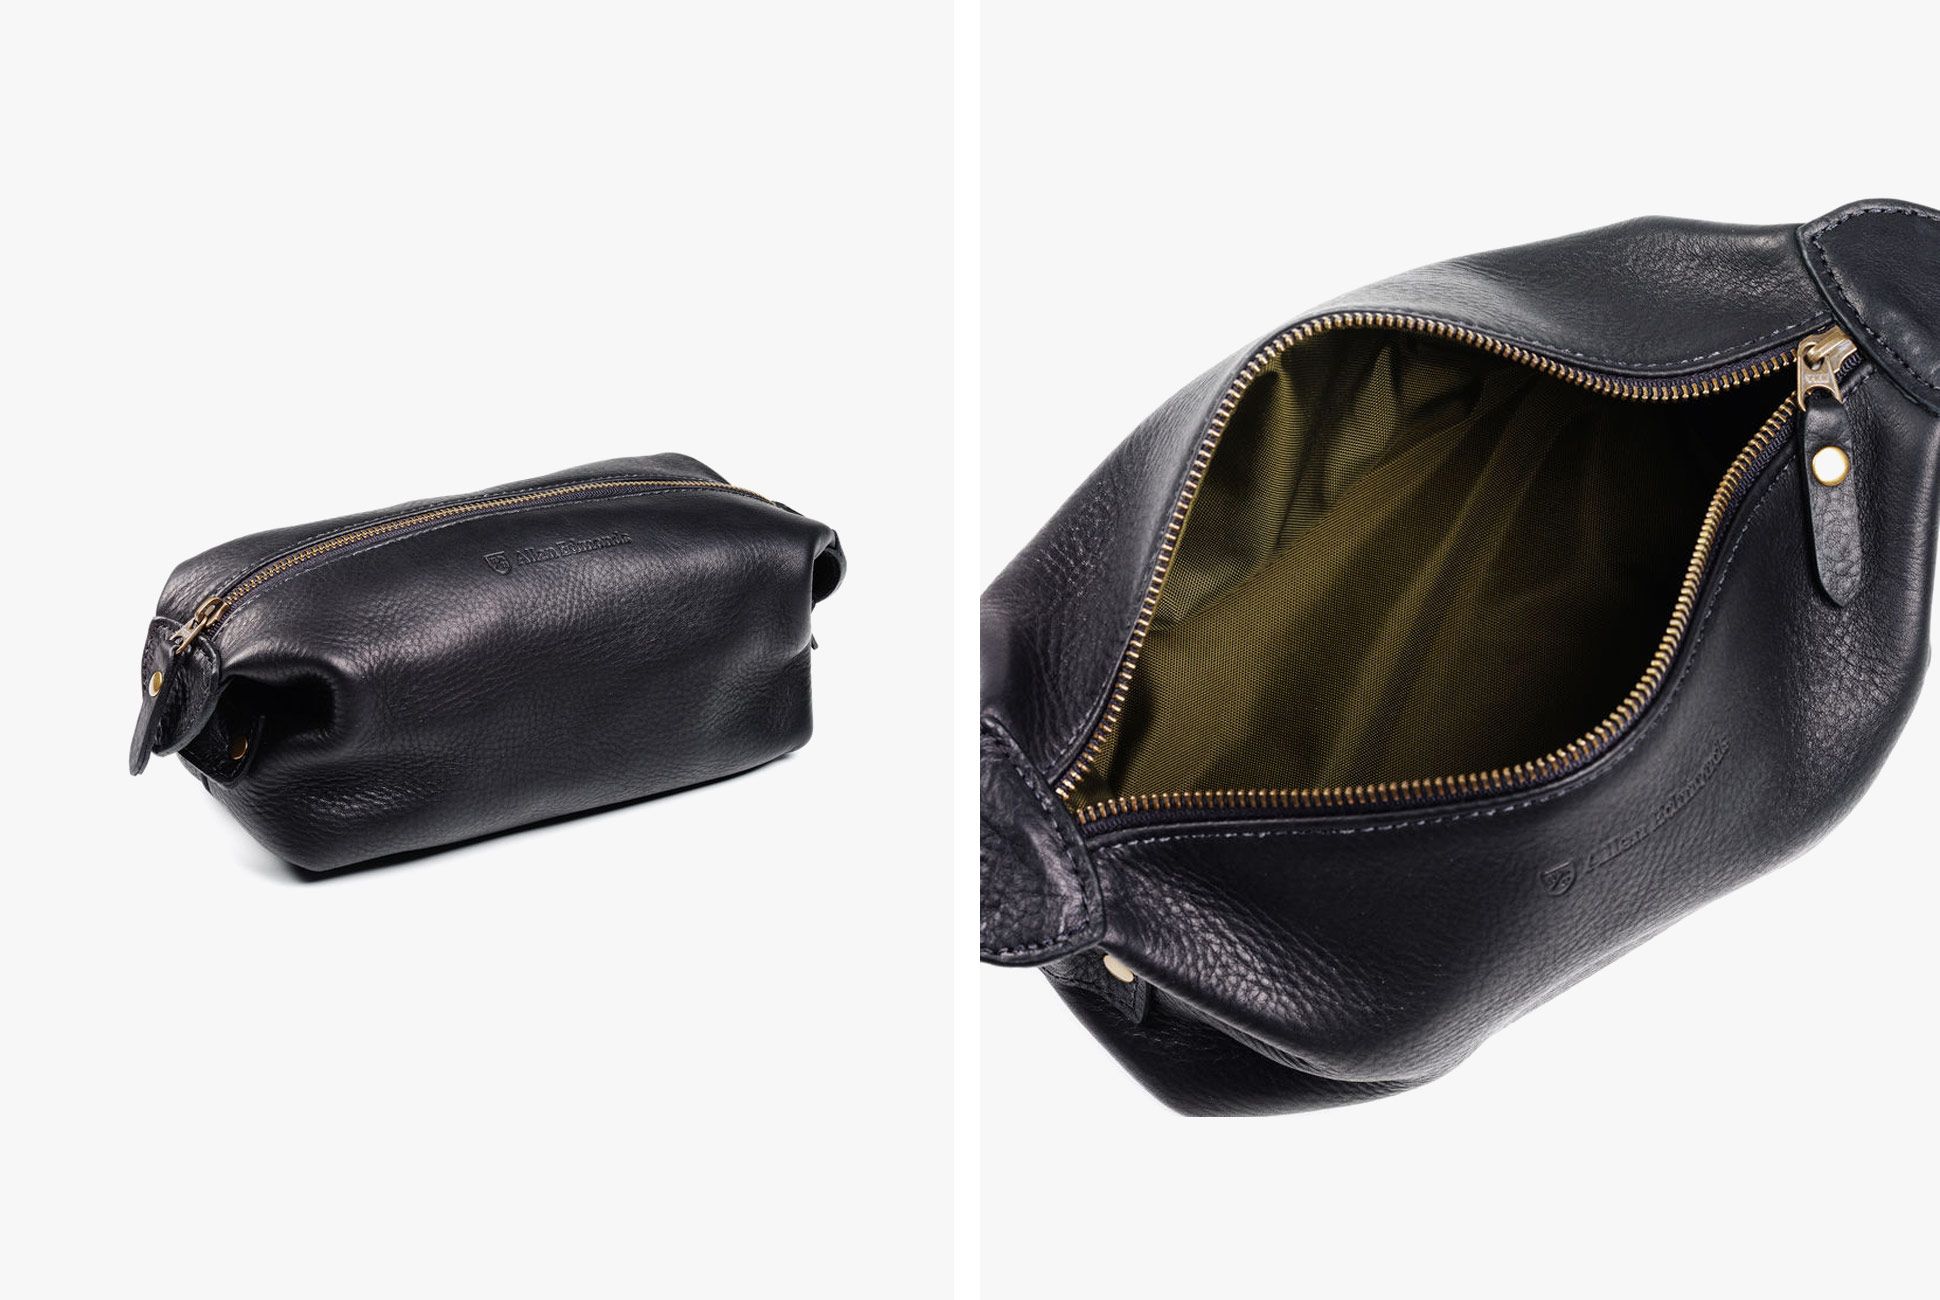 This $175 Leather Dopp Kit from Allen 